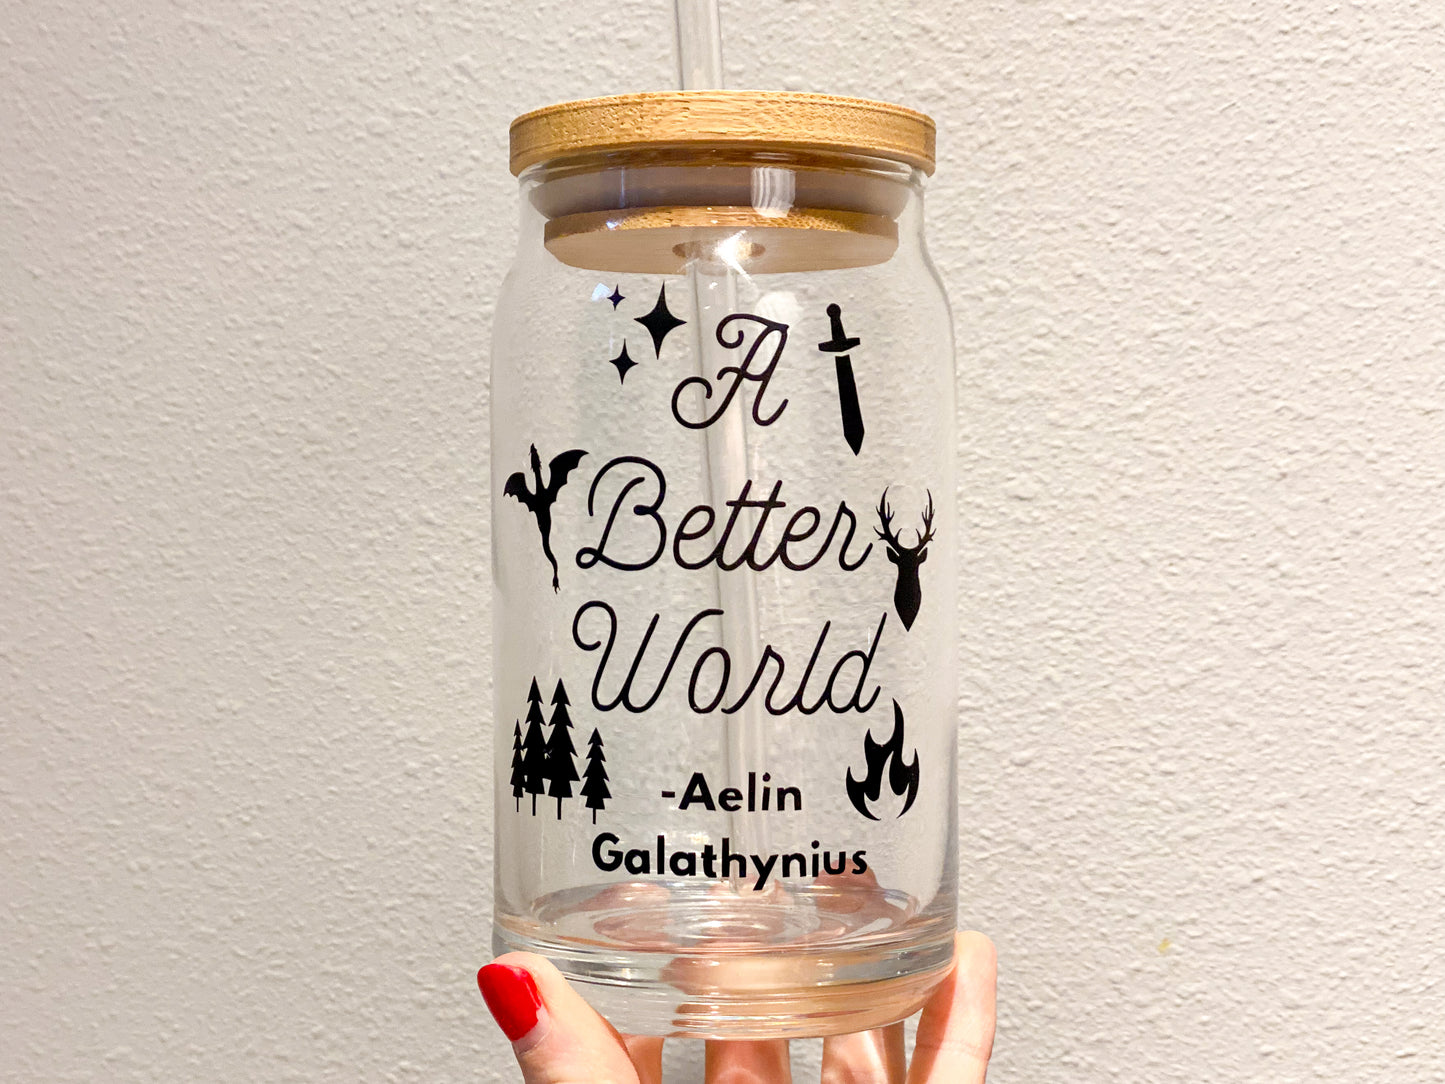 Glass cup for throne of glass book lovers with the quote from aelin galathynius that says a bettwe rold with 6 icons of stars, sword, wyrven, stag, pine trees, and fire on it, all in a black font, white  background with cup in hand